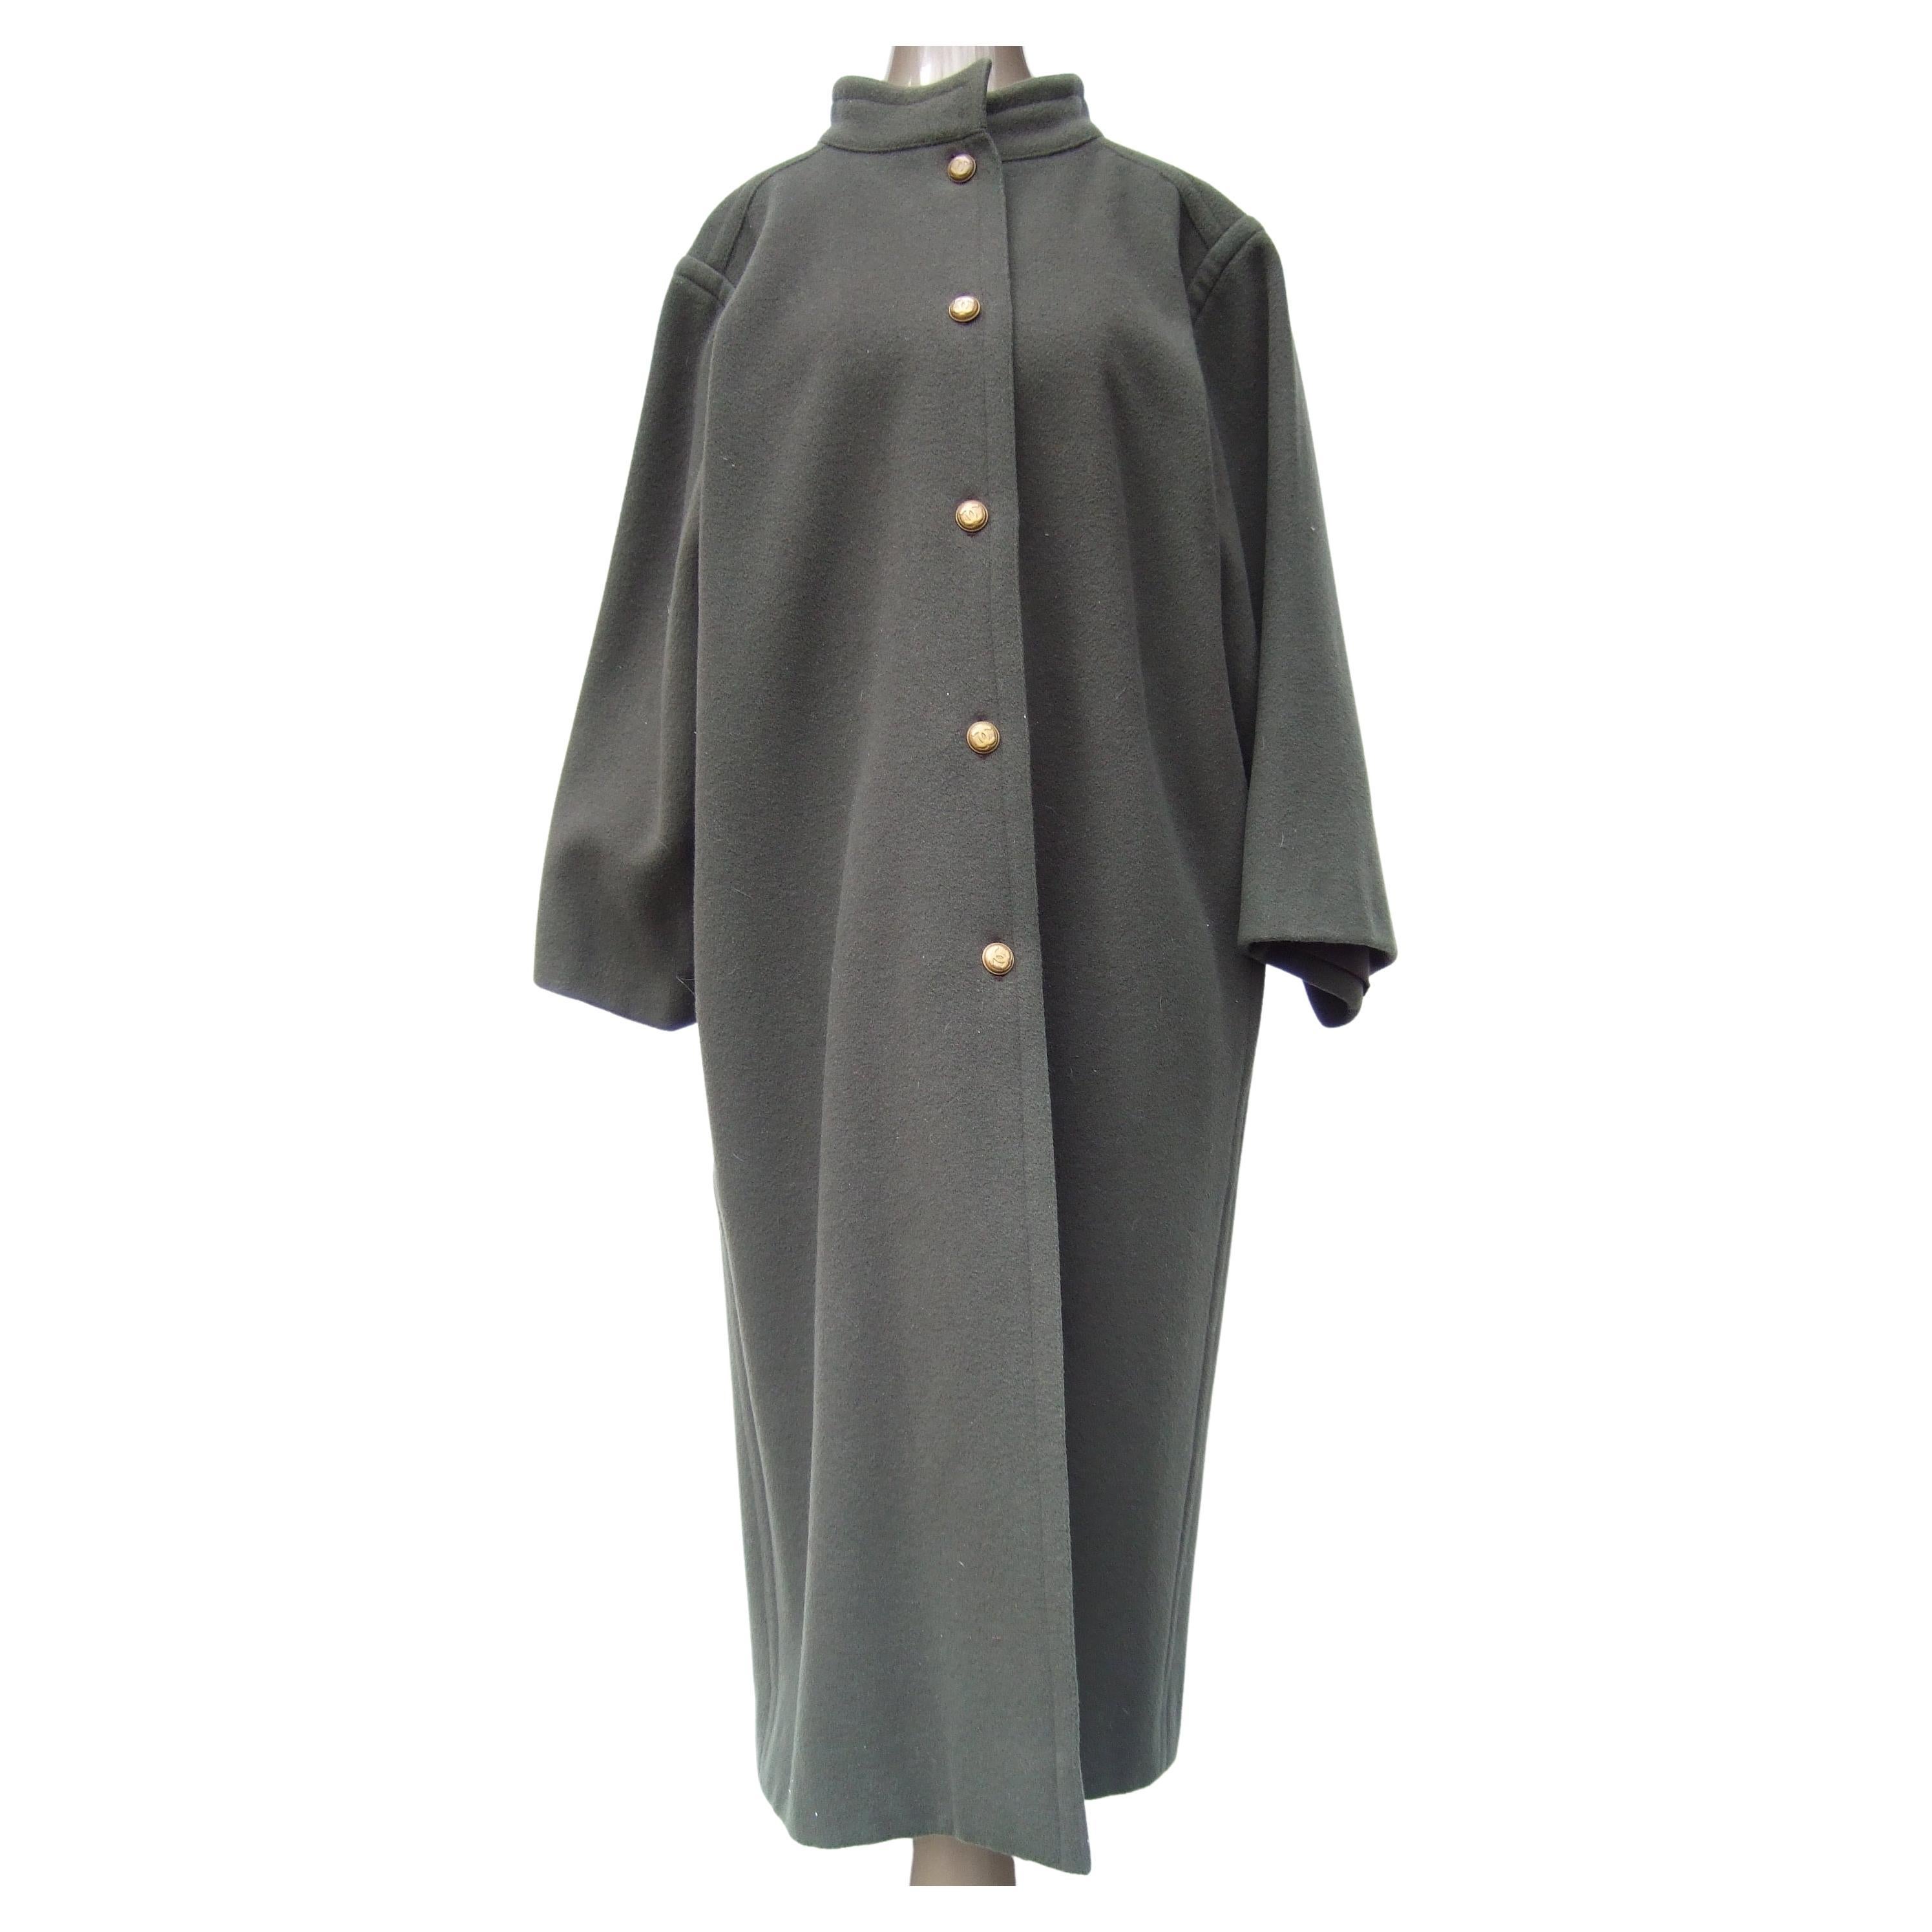 CHANEL Creations Muted Gray - Green Wool Coat with C.C. Buttons c 1980s For Sale